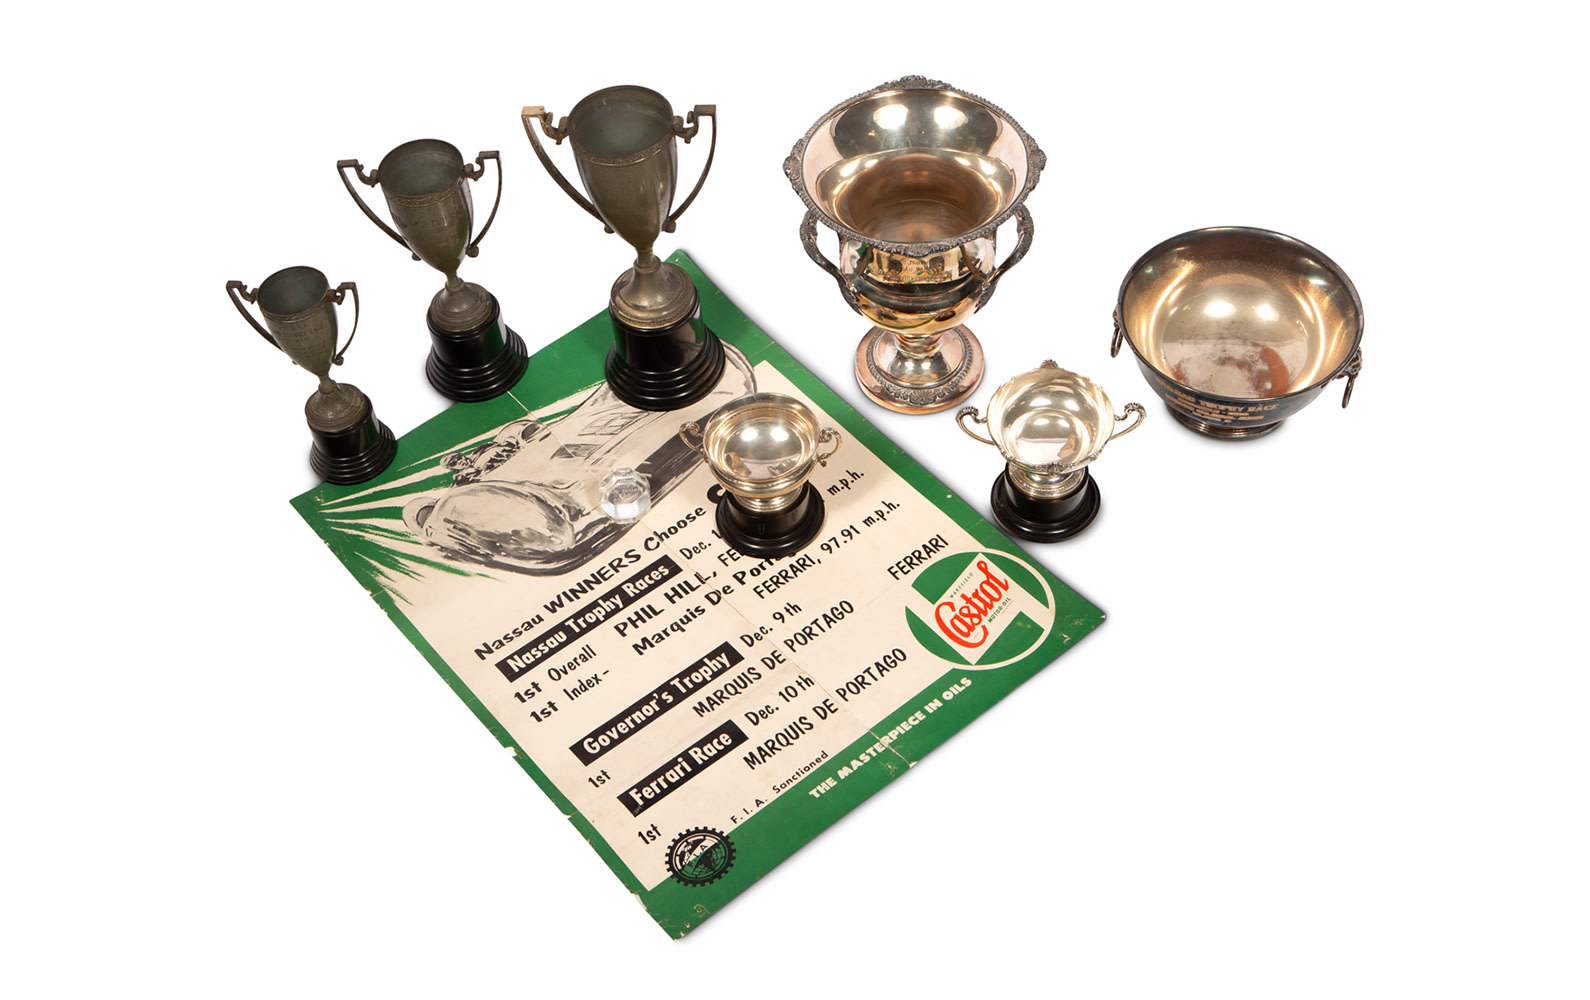 1955 Bahamas Speed Weeks Trophies, Awards, and Poster